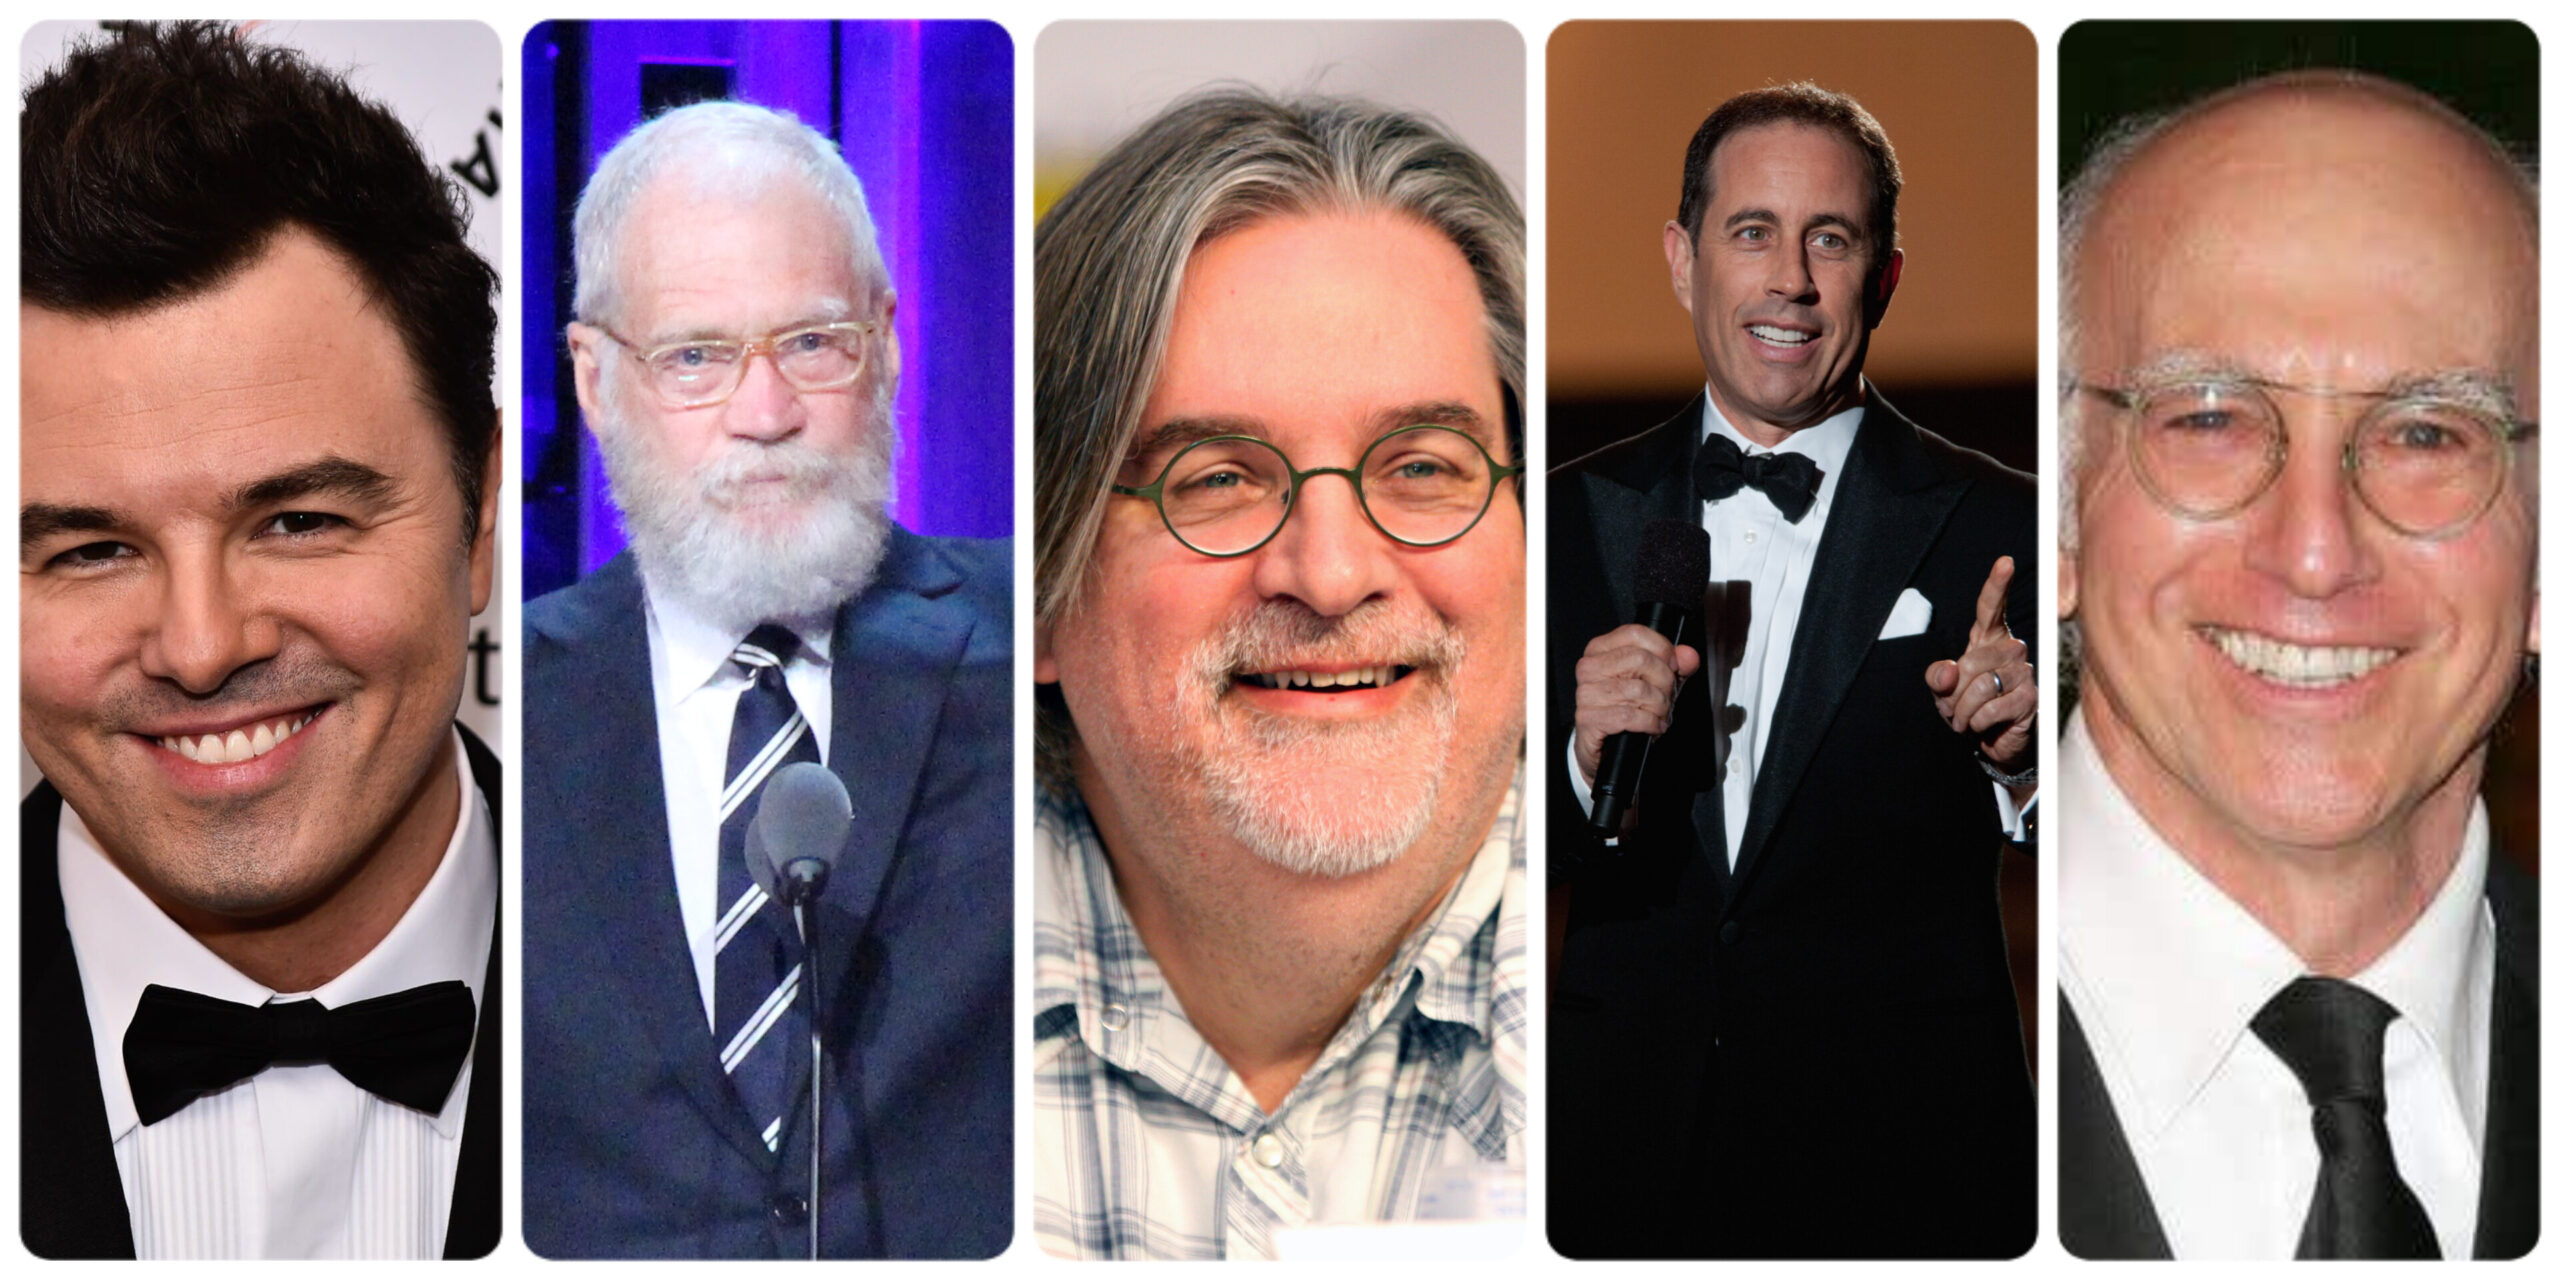 Top 5 Richest Comedians in the World